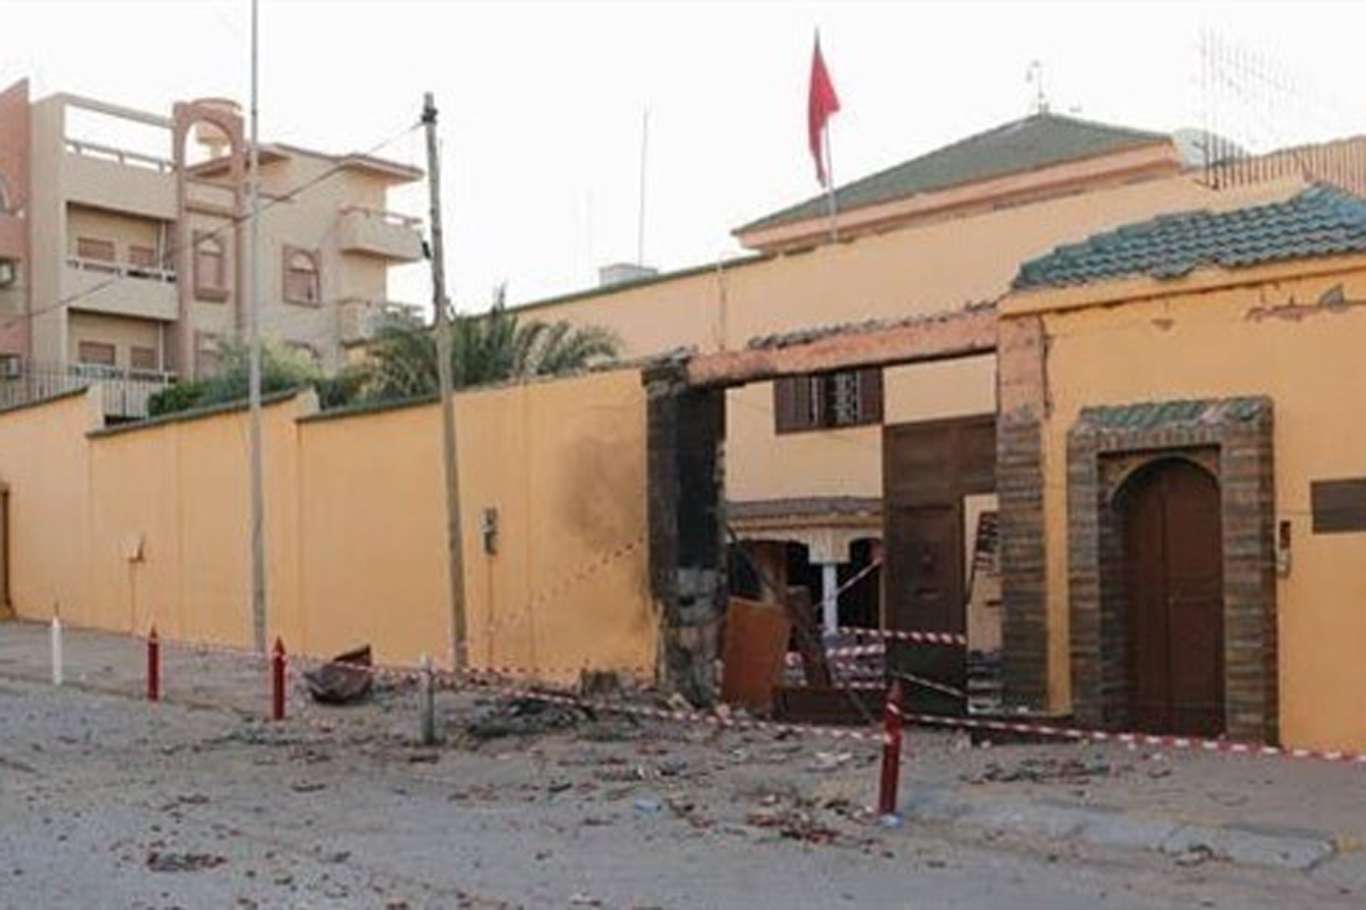 Morocco to reopen its consulate in Libya closed eight years ago